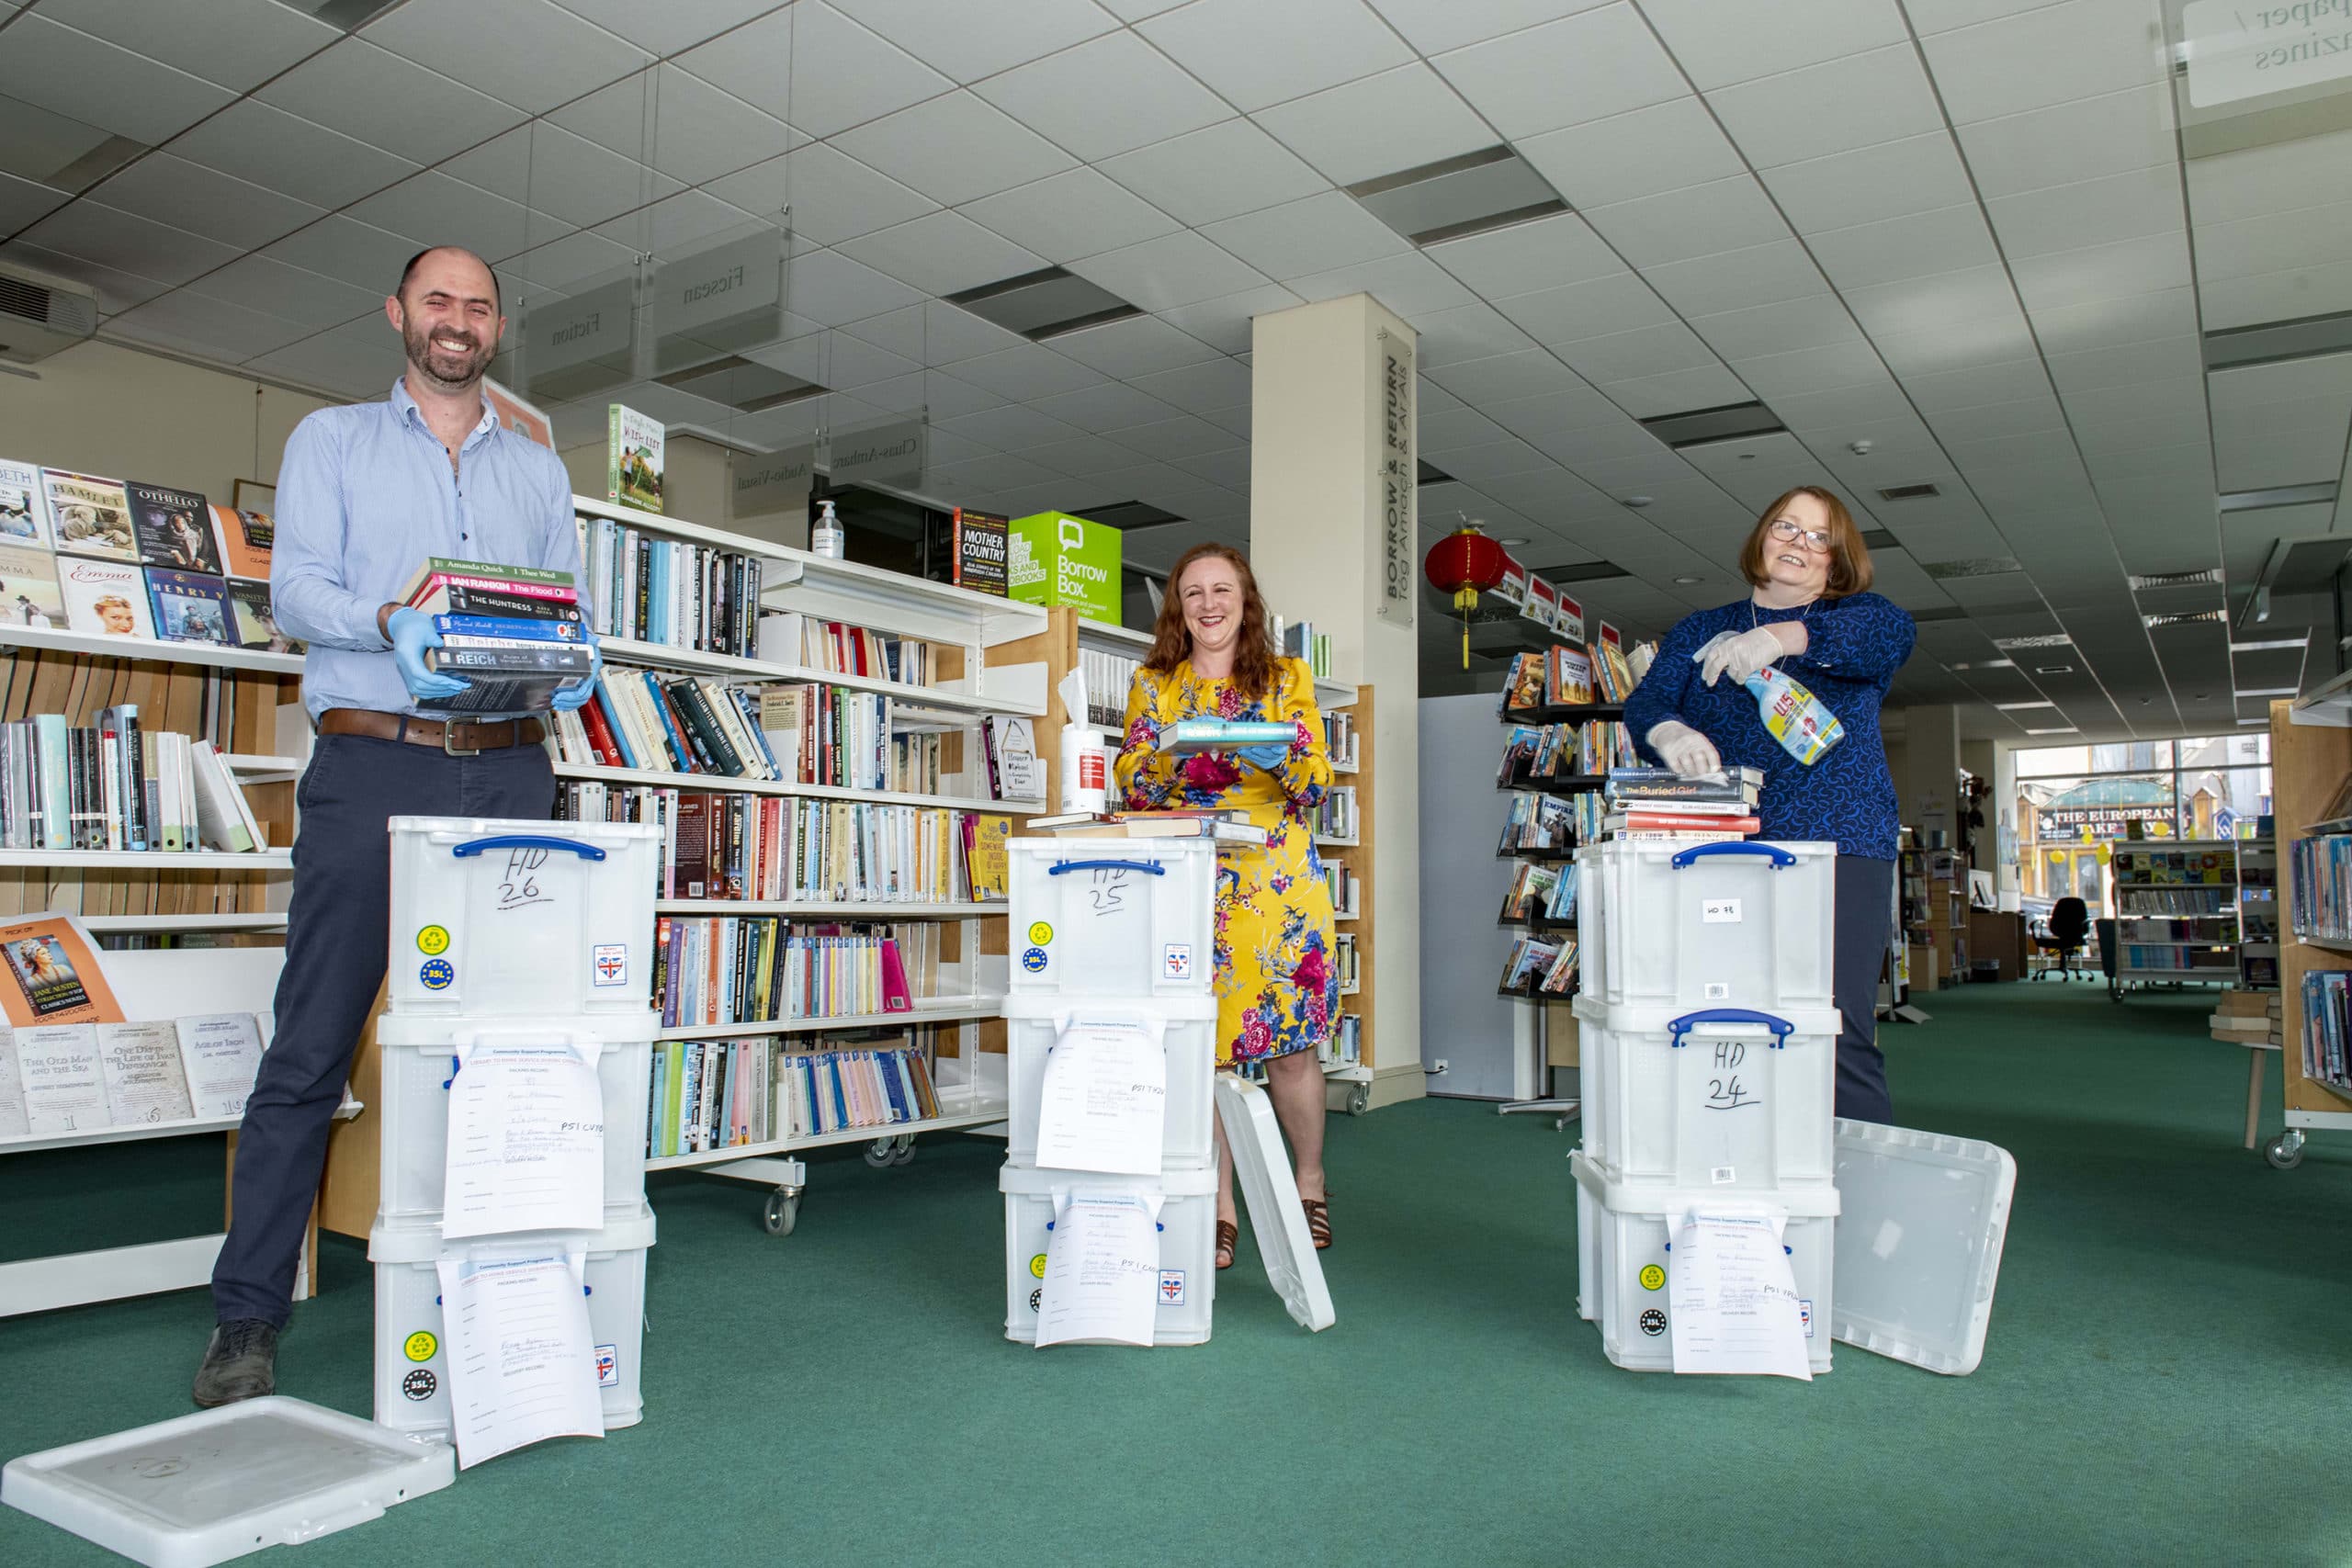 Cork County Council expands successful library delivery service